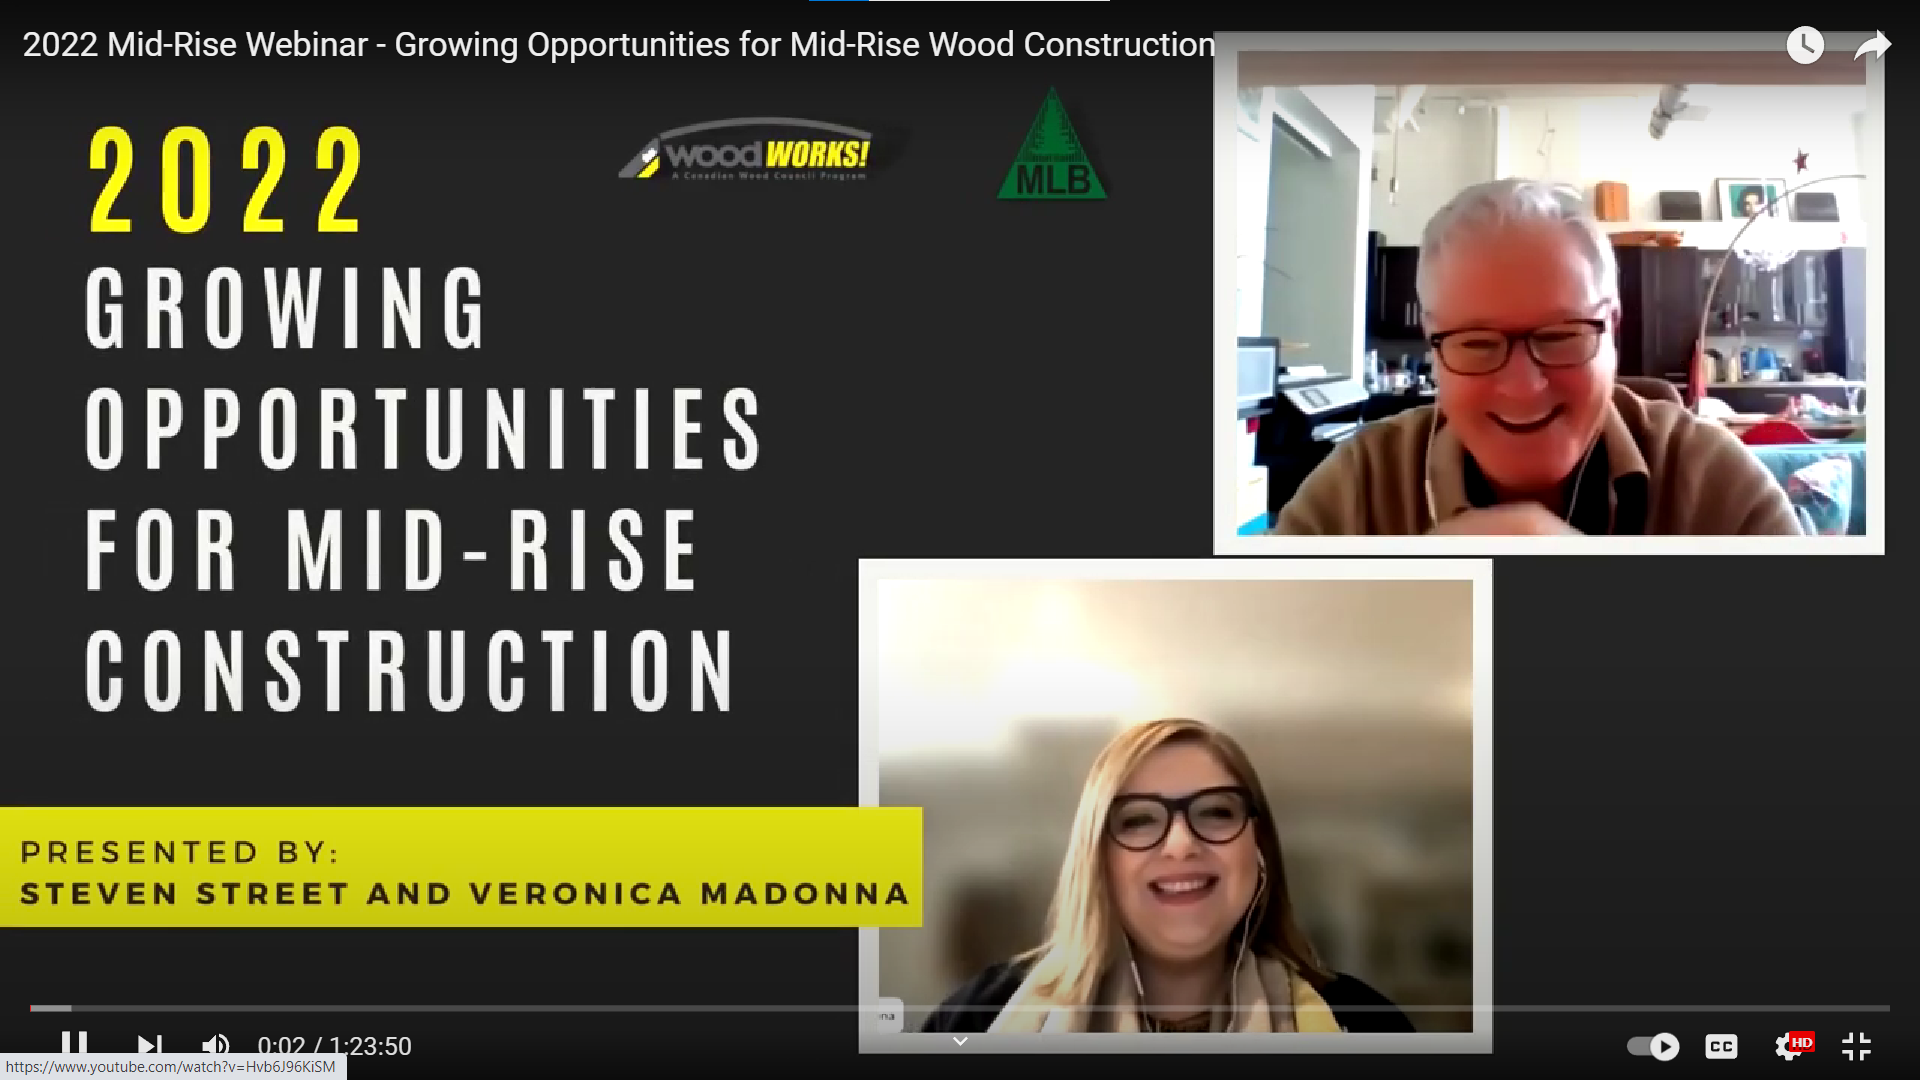 2022 Mid-Rise Webinar - Growing Opportunities for Mid-Rise Wood Construction